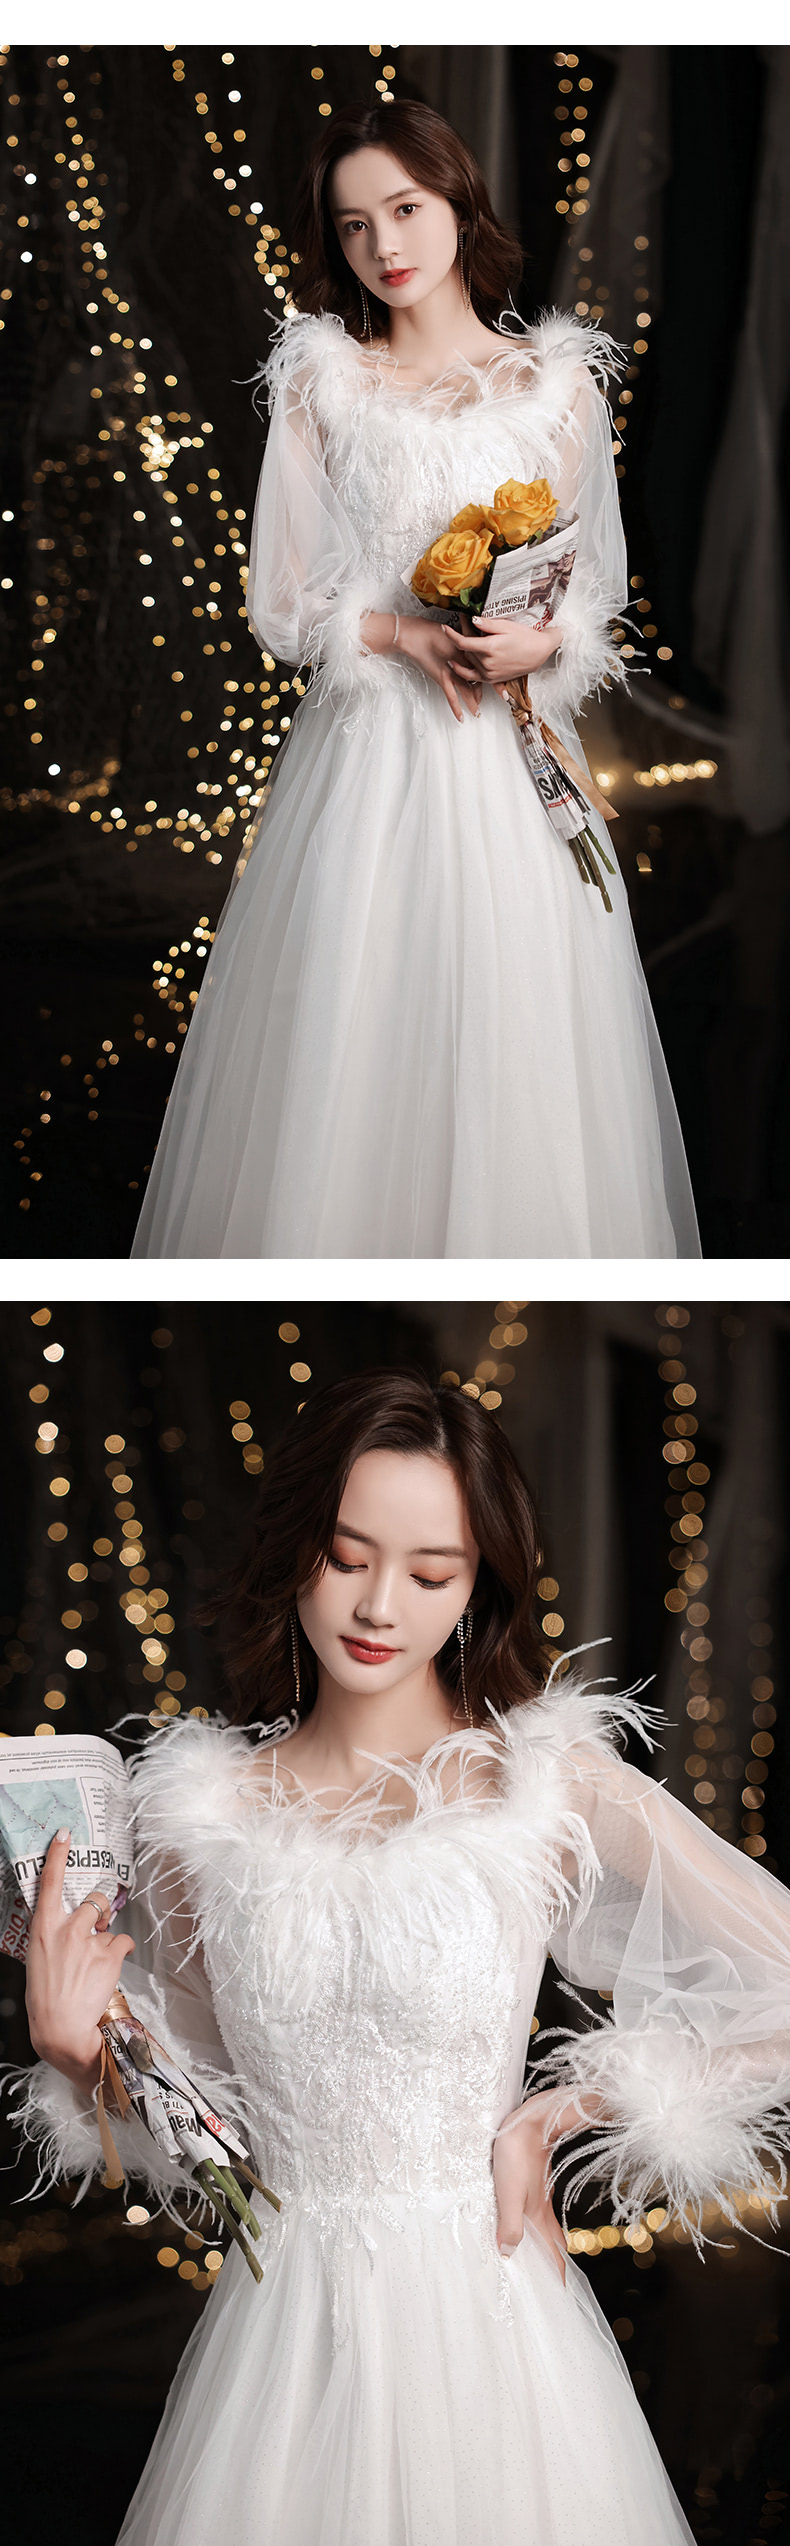 Elegant-White-Long-Sleeve-Feather-Banquet-Evening-Prom-Formal-Dress